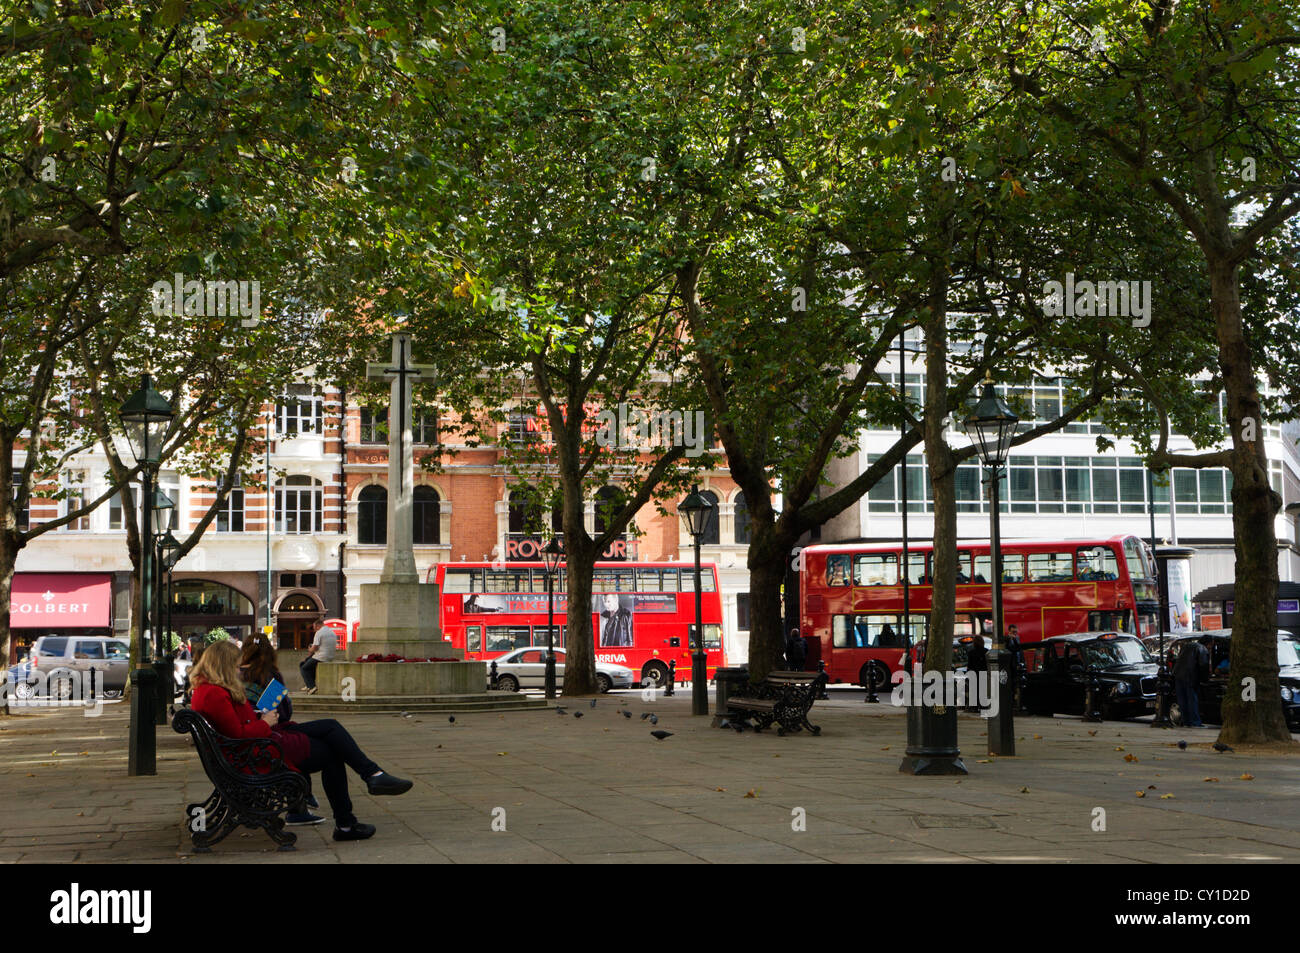 People sitting in Sloane Square, London. Stock Photo